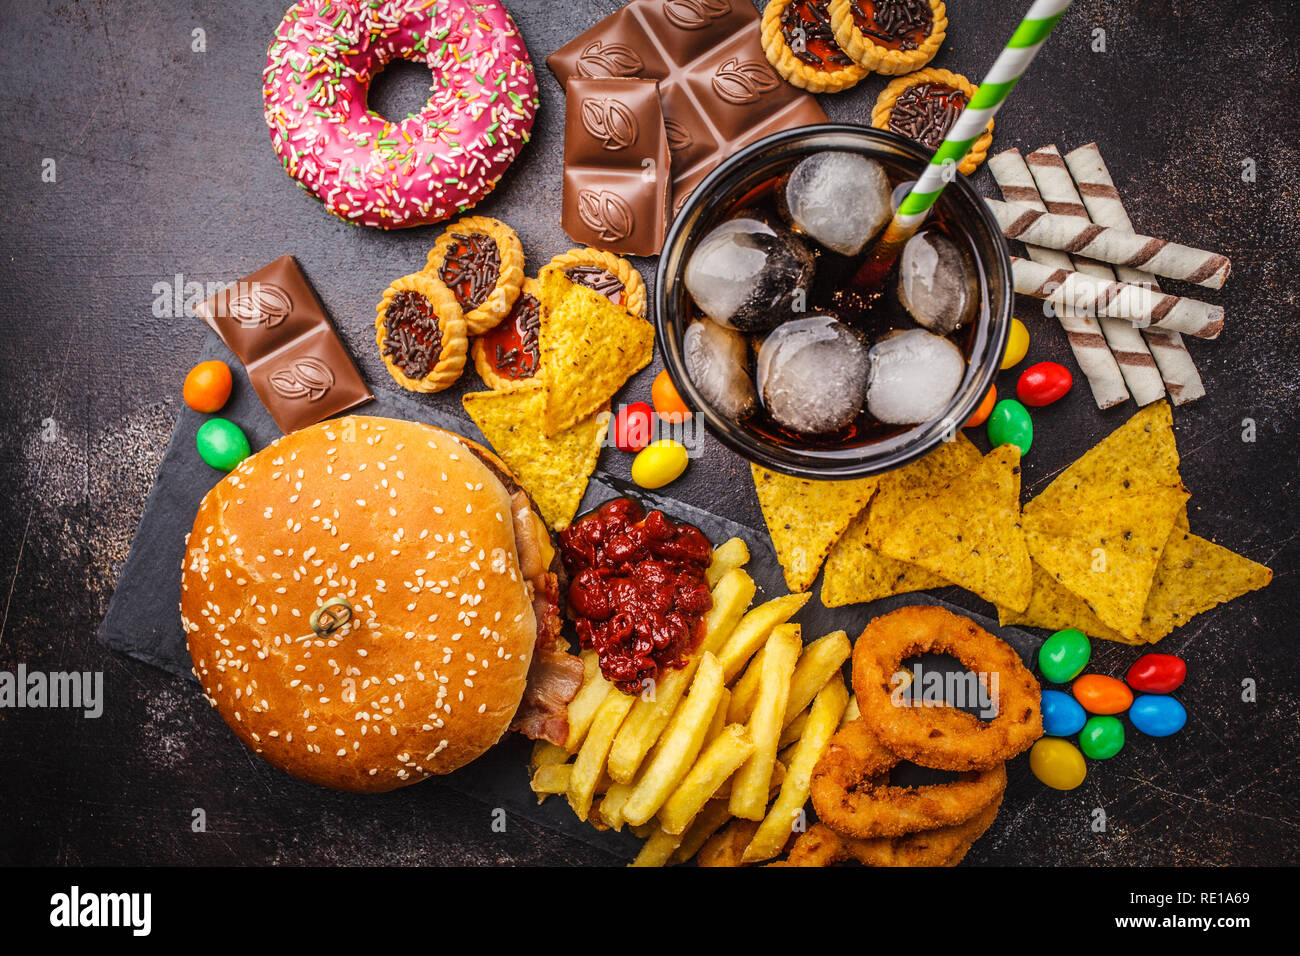 Junk food concept. Unhealthy food background. Fast food and sugar. Burger, sweets, chips, chocolate, donuts, soda on a dark background. Stock Photo